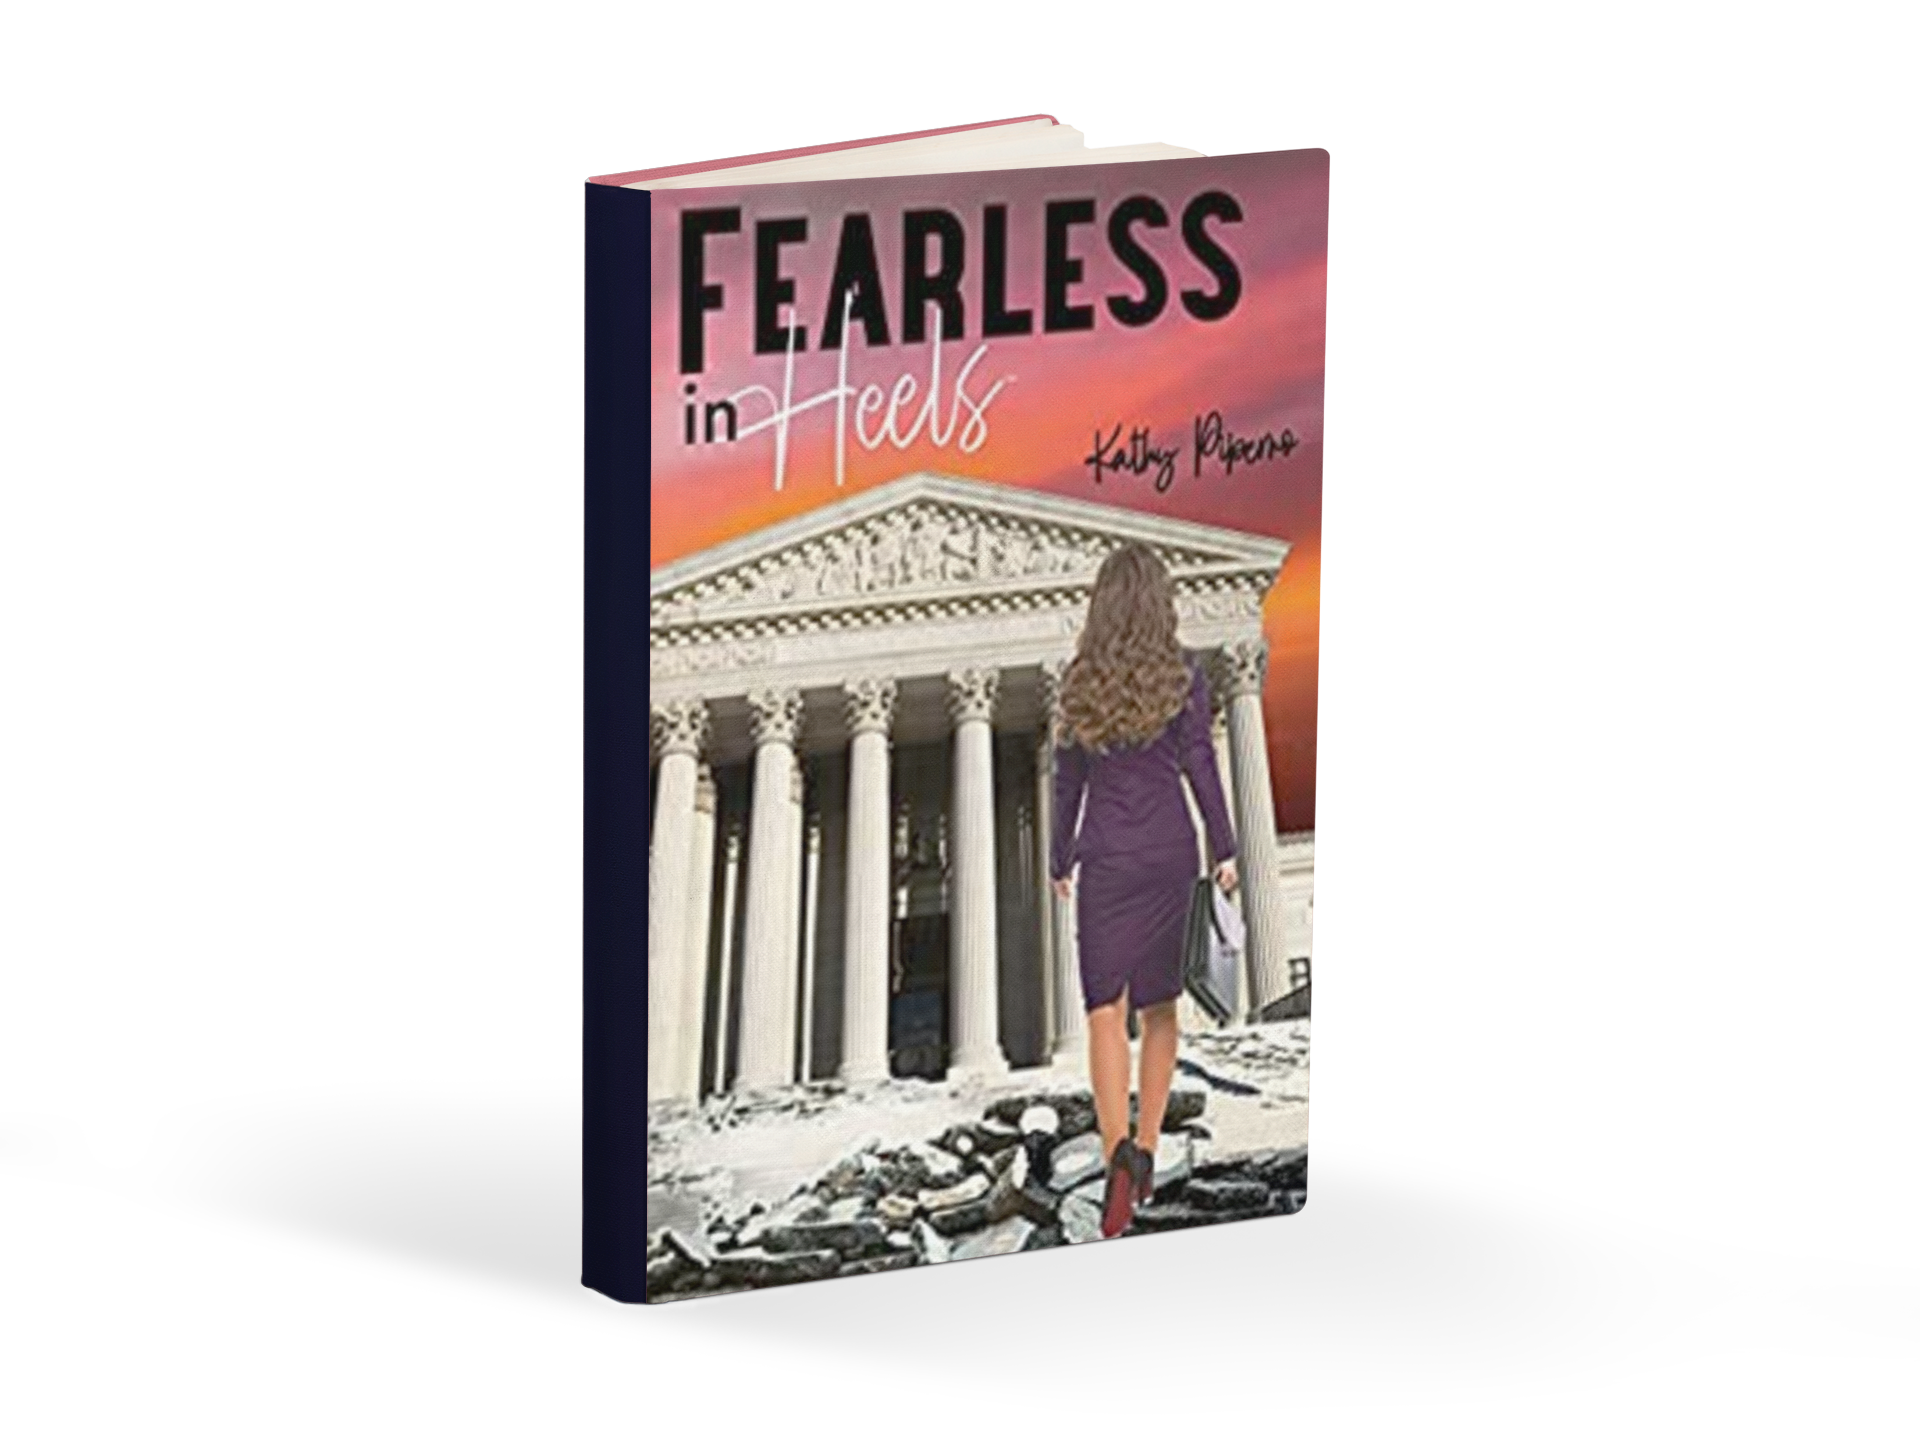 Kathy Piperno’s Fearless in Heels Empowers Victims of Domestic Violence 